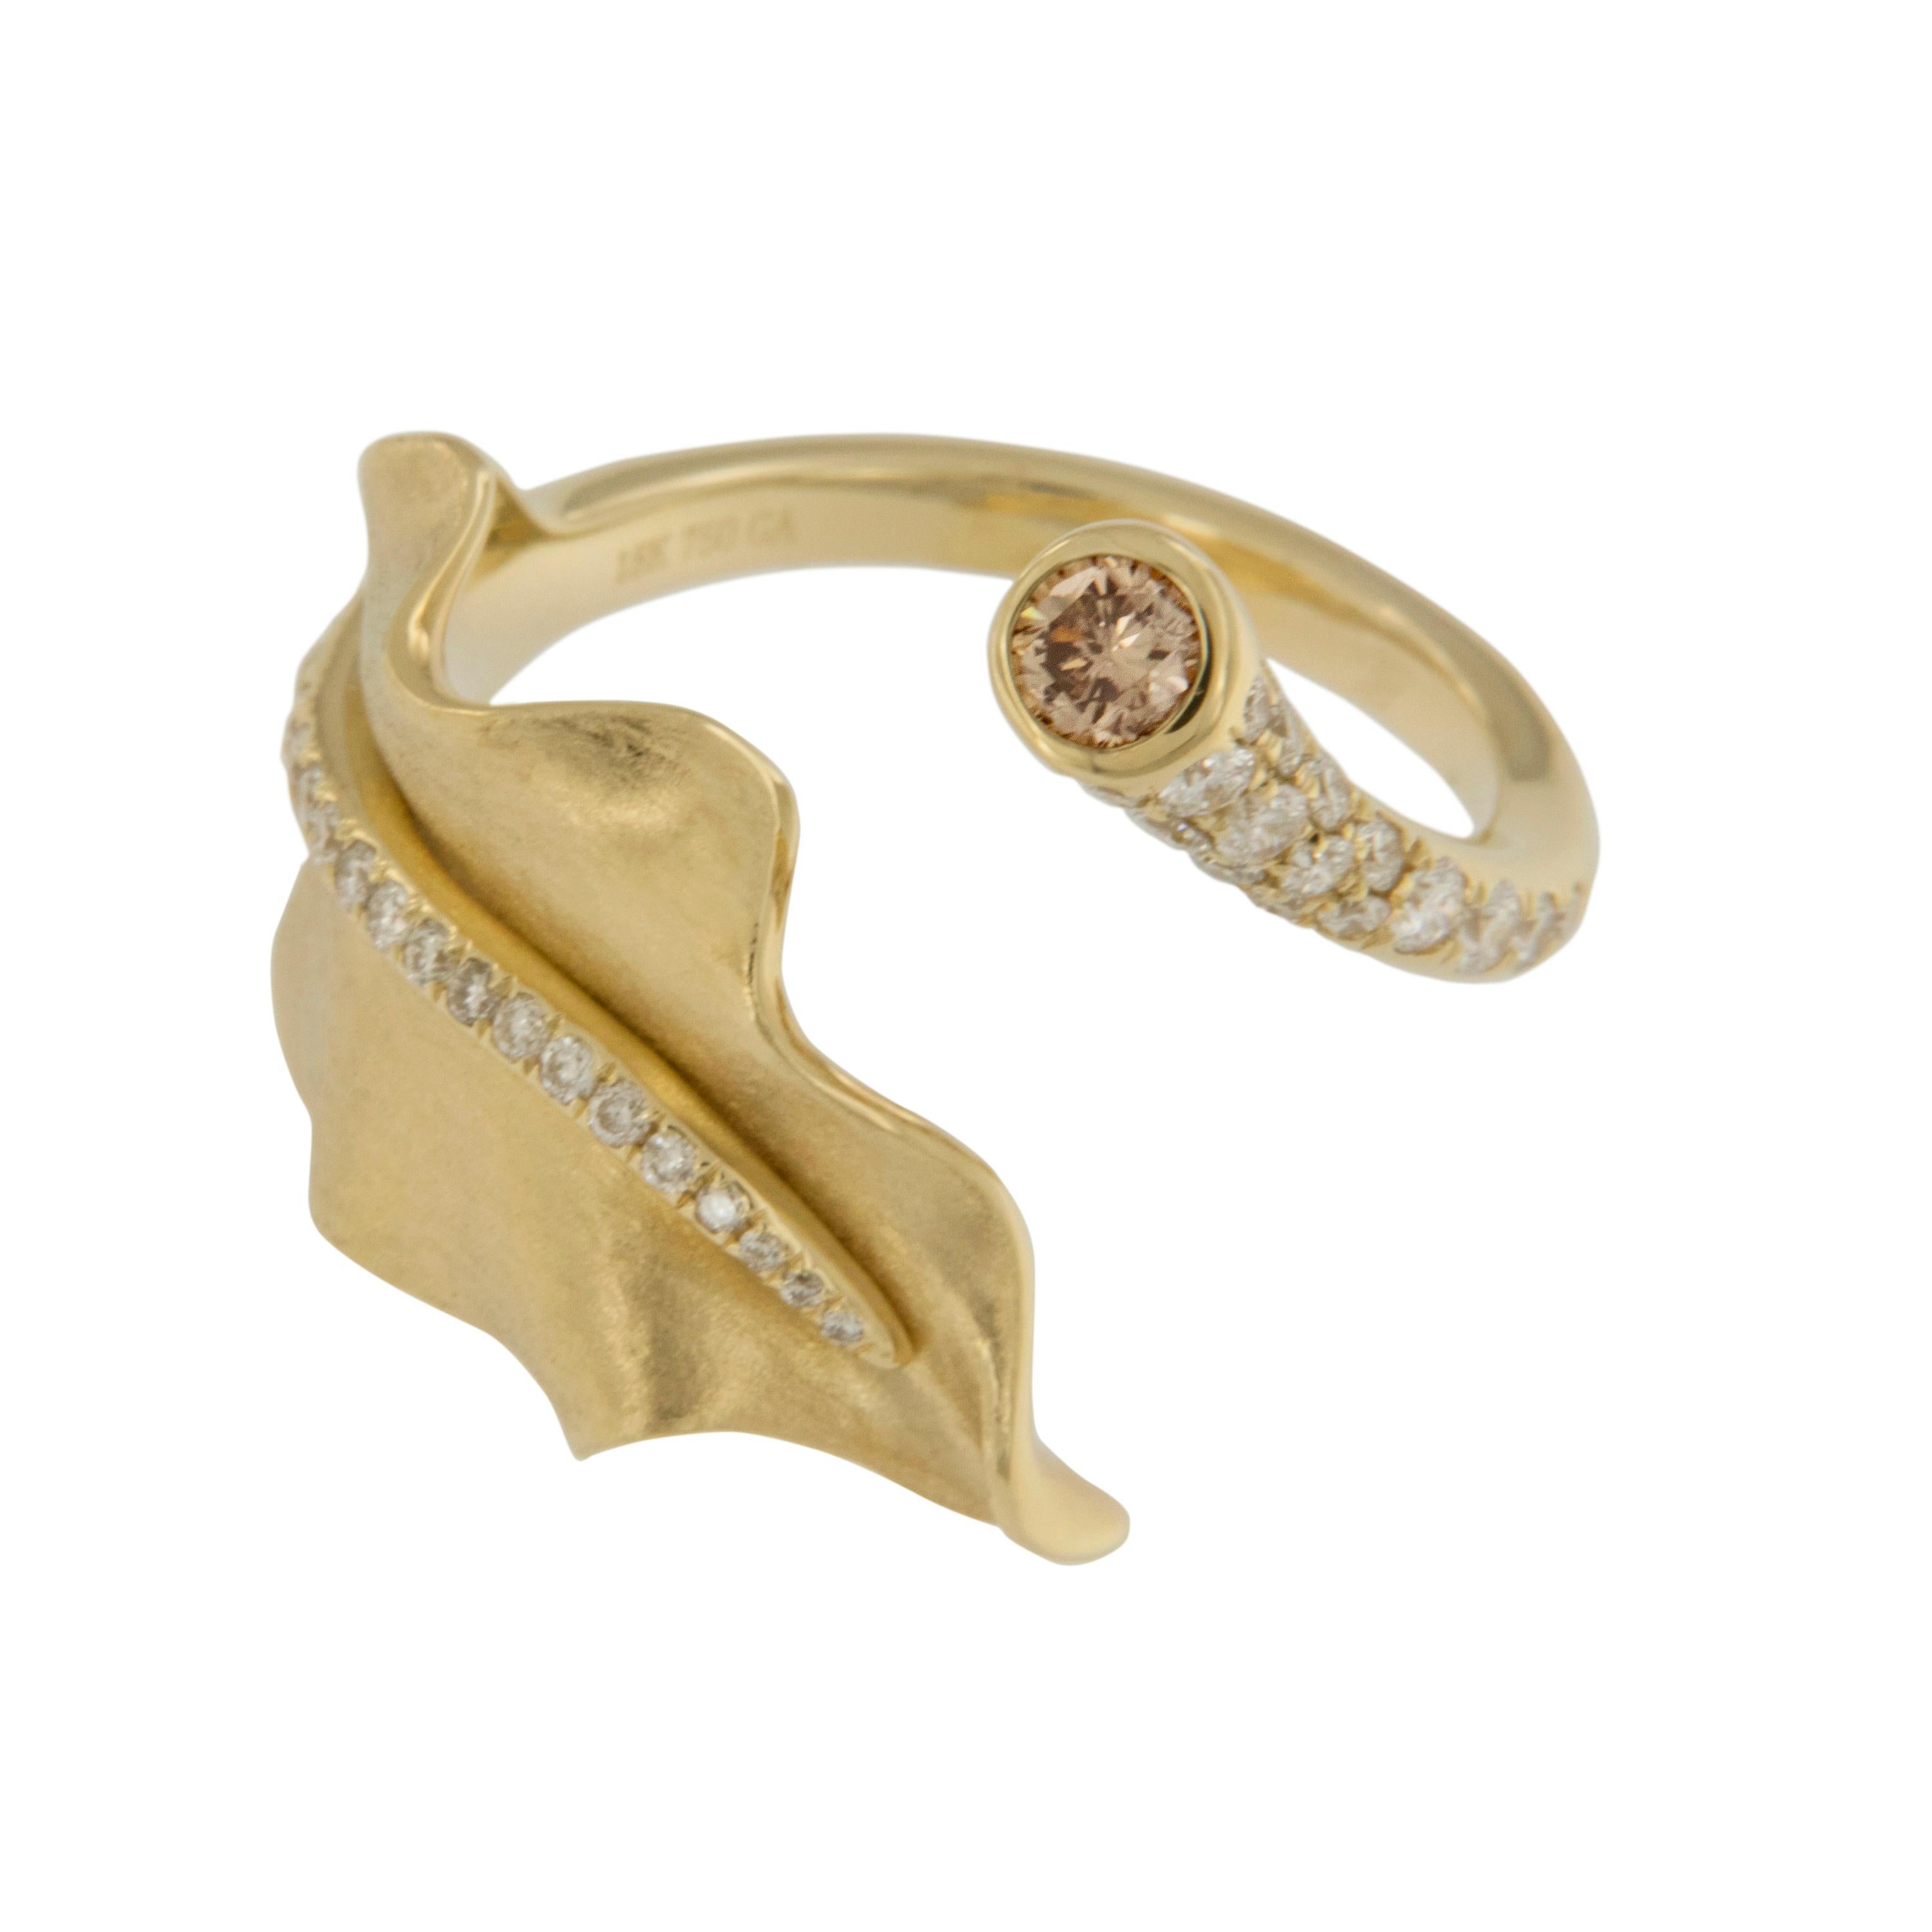 You can almost feel the warm, crisp air & subtle rustle of a perfect fall day when looking at this stunning, ethereal leaf motif ring. Fine details like the satin fabric texture of the 18 karat yellow gold undulating leaf perfectly set off with a